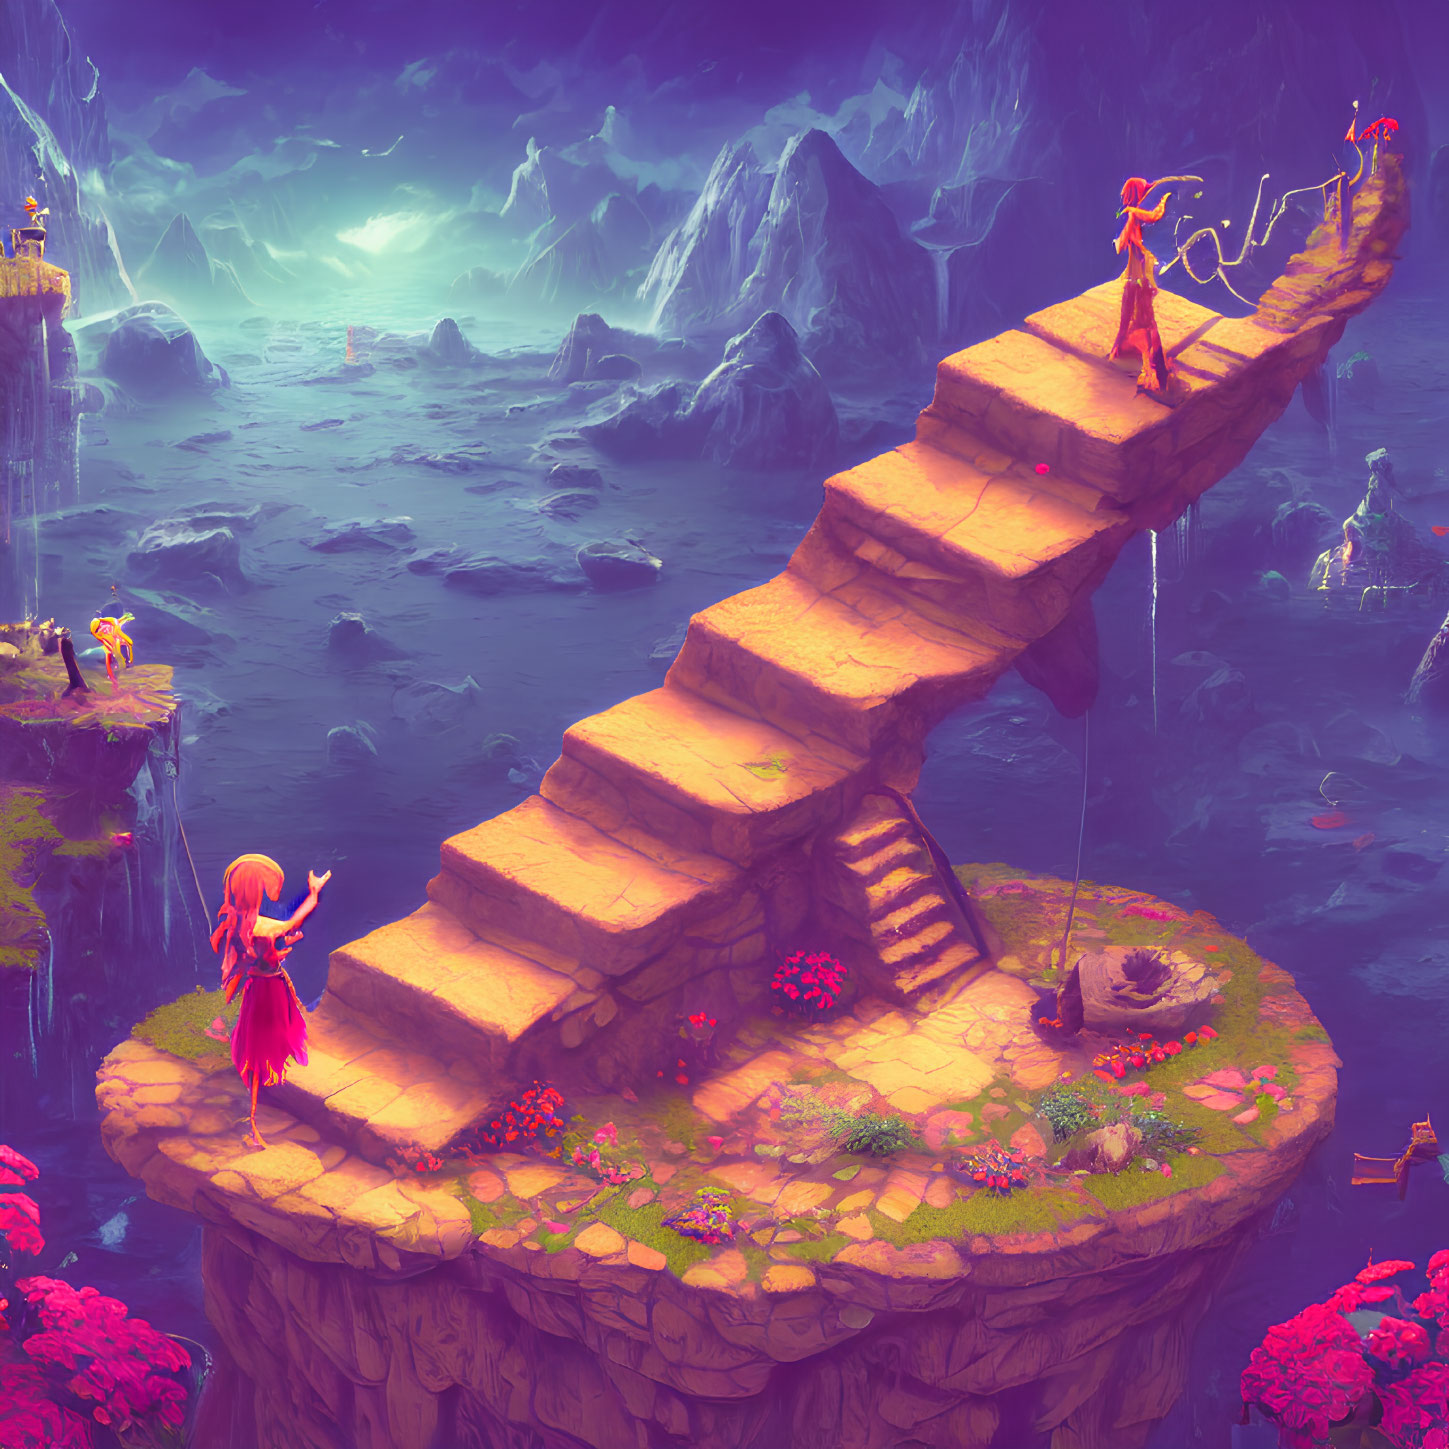 Floating islands fantasy landscape with glowing staff character on spiraling staircase in purple ambiance